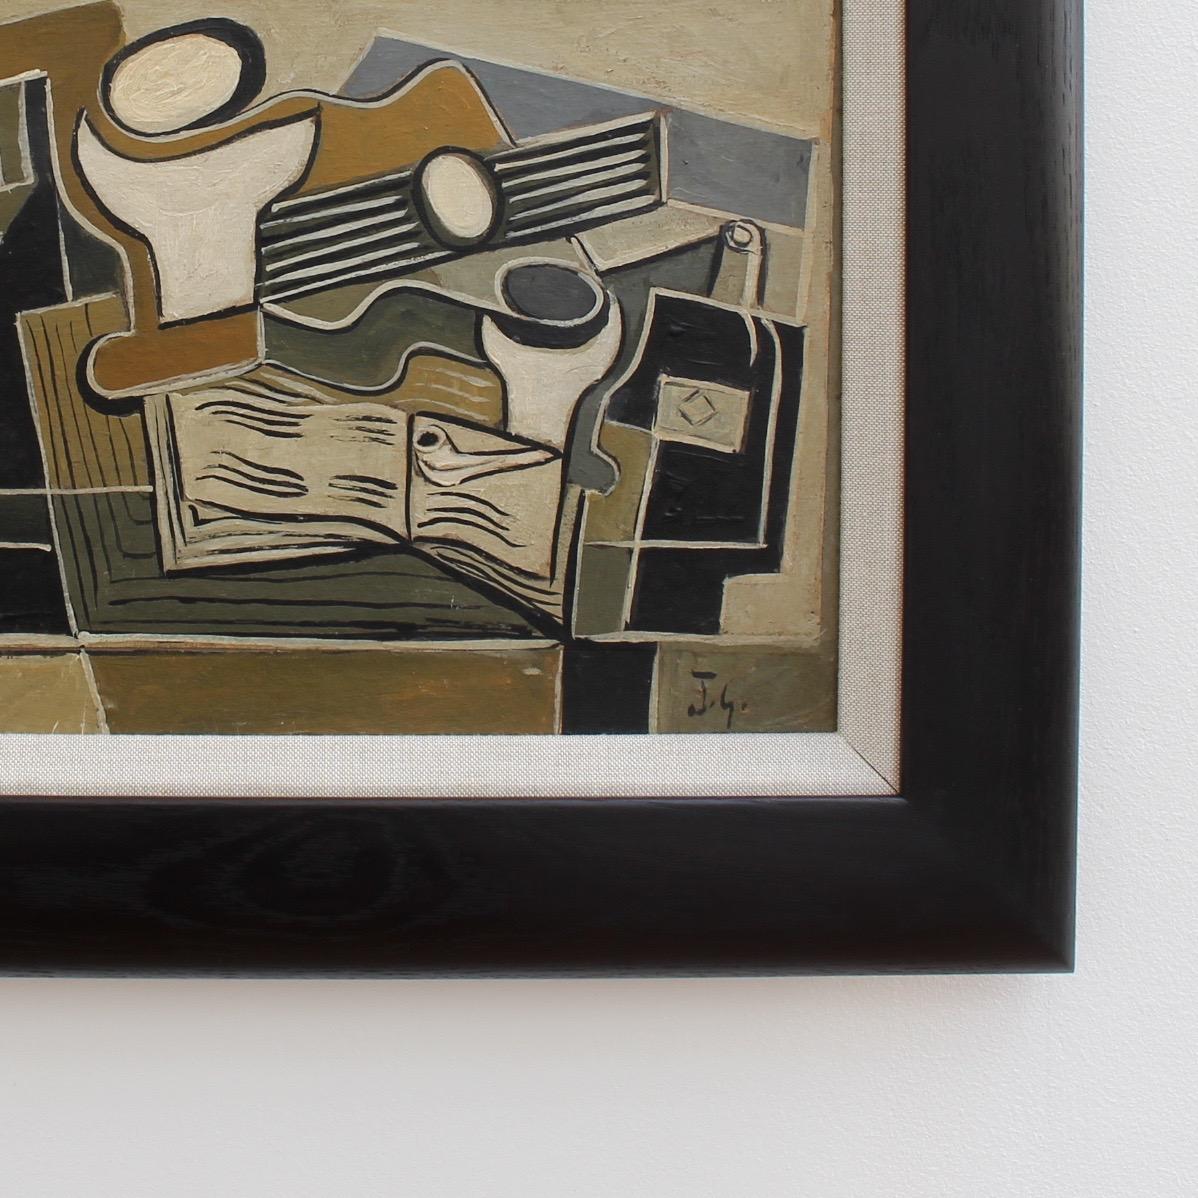 J.G., 'Still Life with Guitar, Book, Pipe and Bottle', Cubist Oil Painting 3